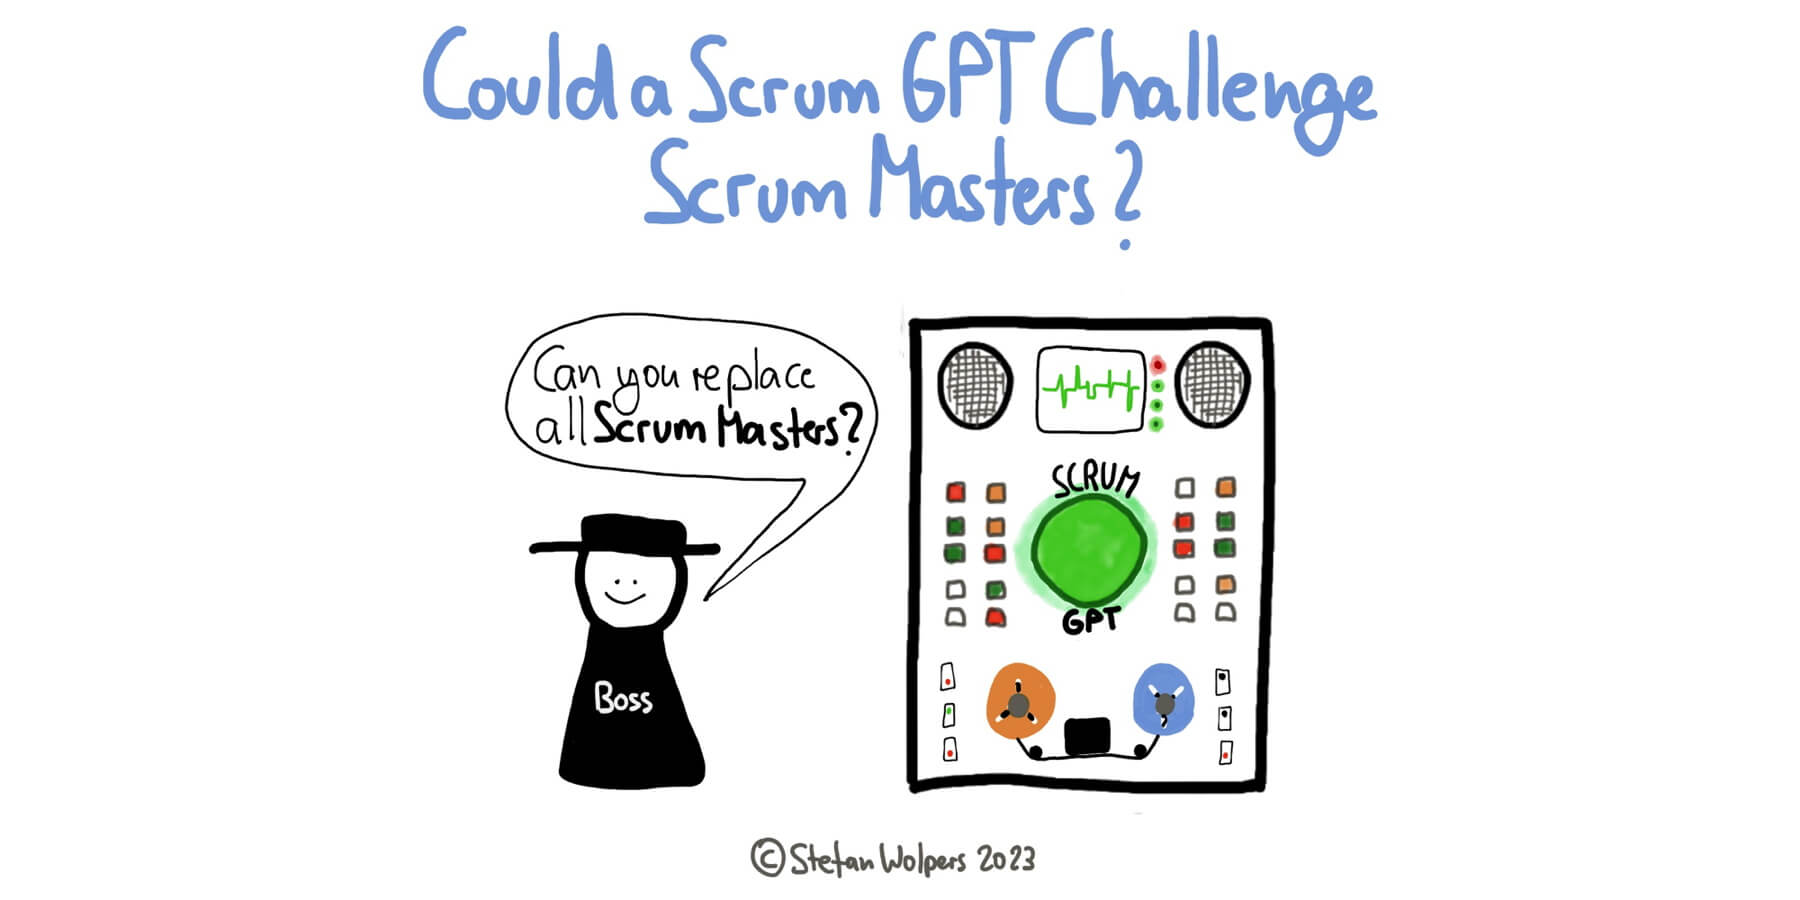 Could a Scrum GPT Challenge Scrum Masters? Berlin-Product-People.com